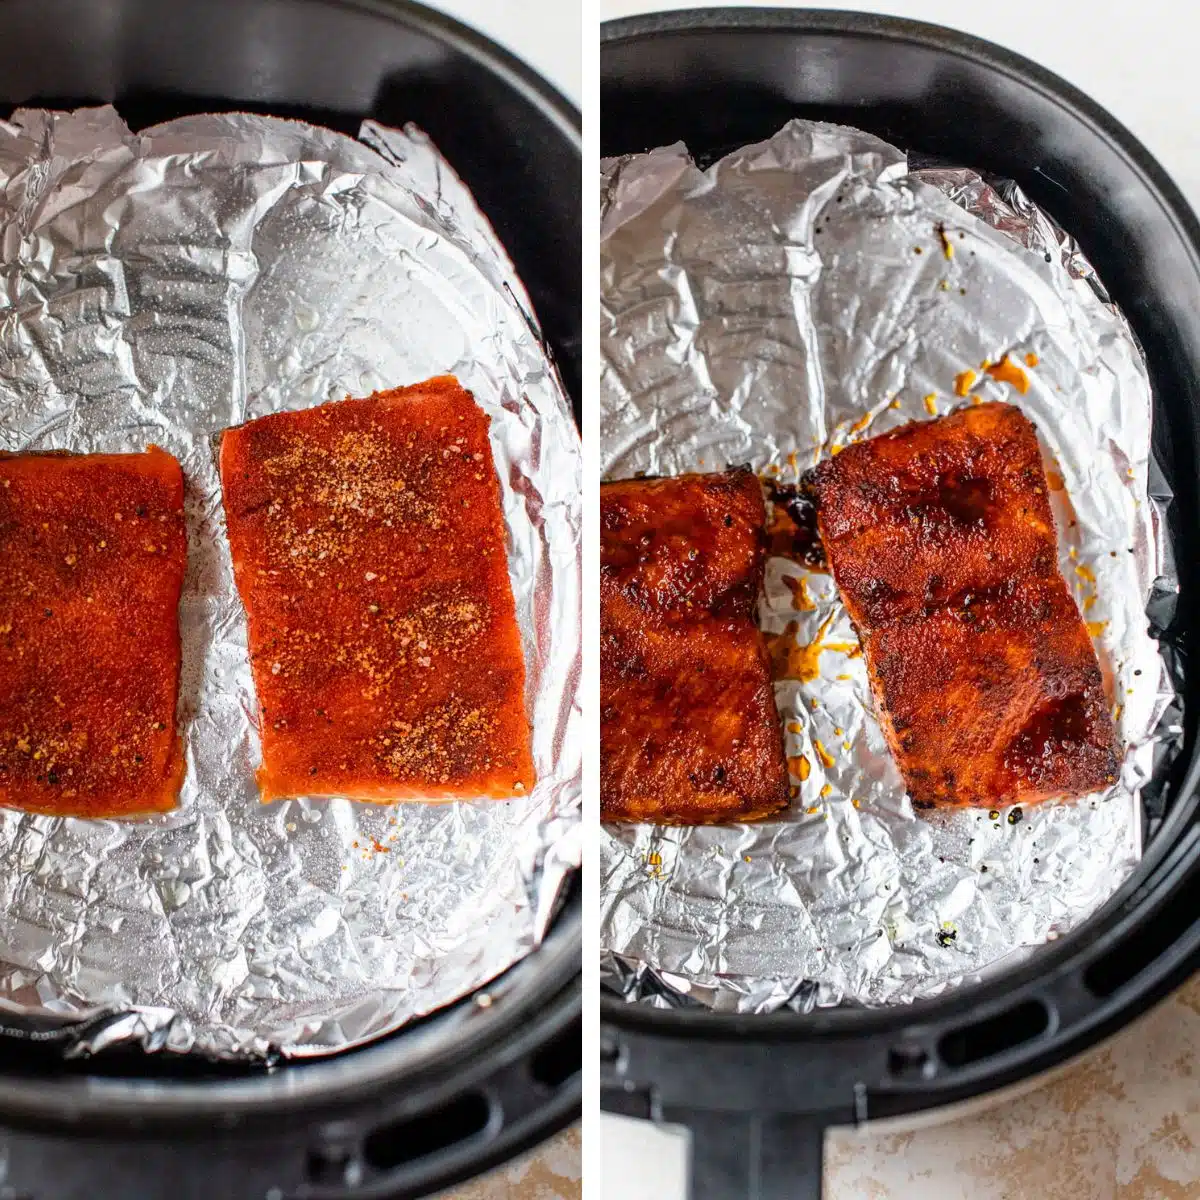 2 images: the left image shows raw salmon being put into the air fryer and the right image shows the salmon being flipped halfway through cooking in the air fryer